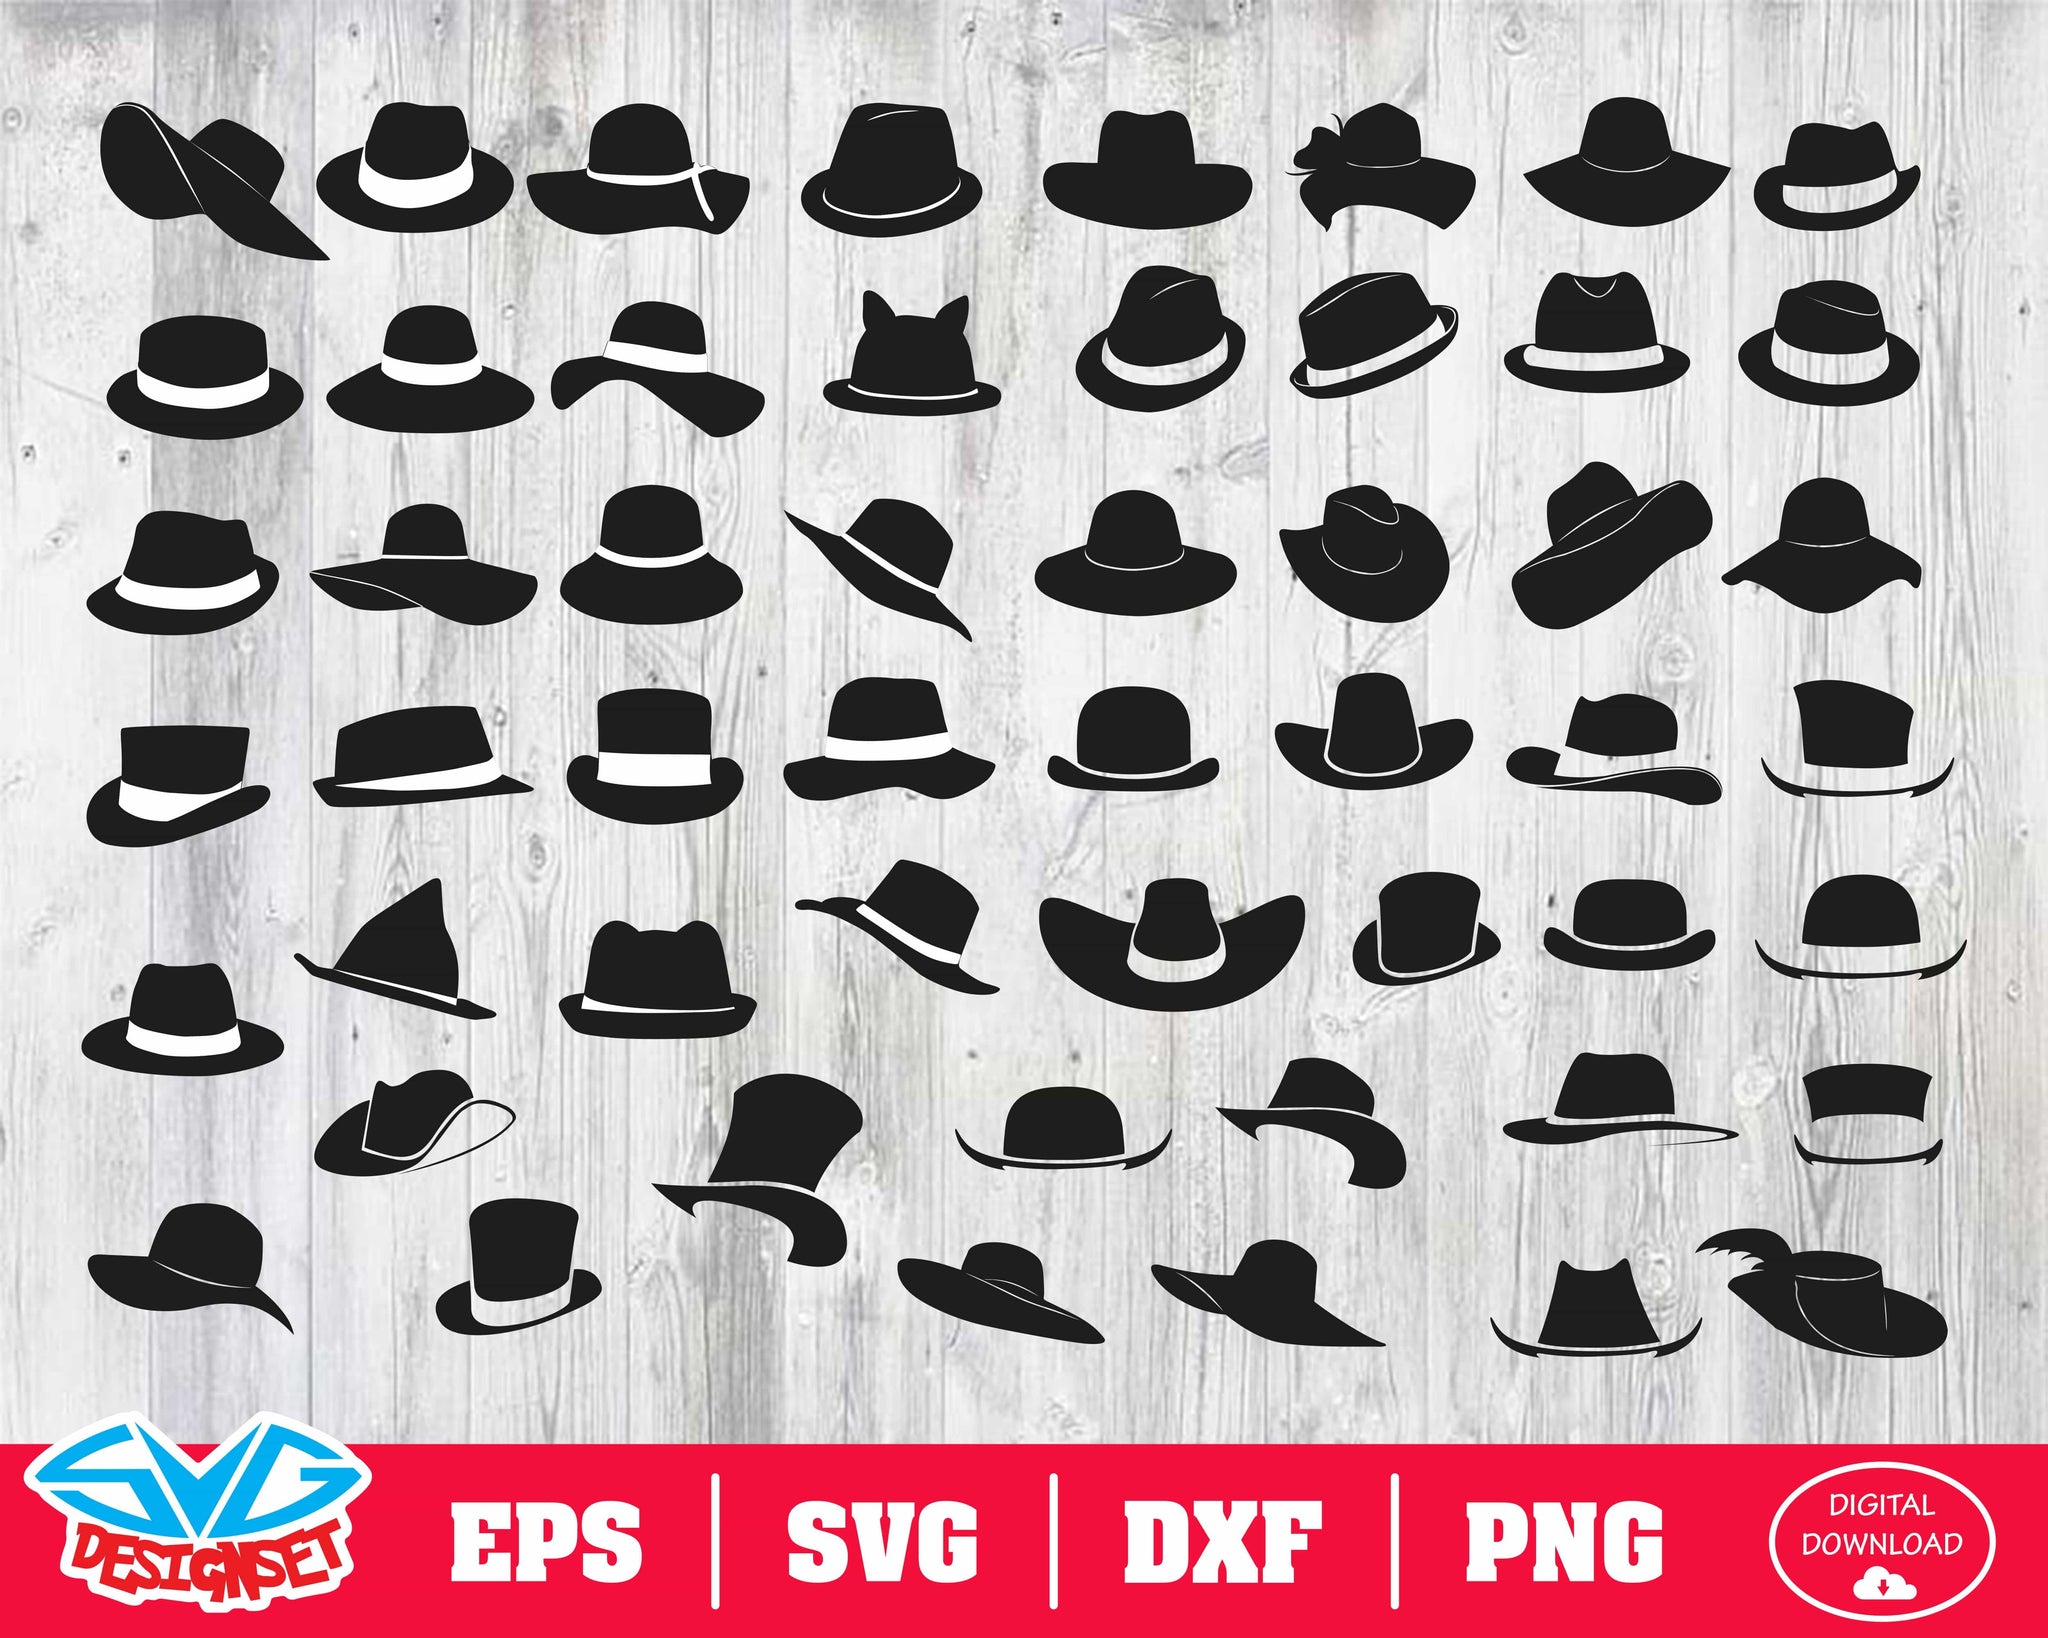 Hats Svg, Dxf, Eps, Png, Clipart, Silhouette and Cutfiles - SVGDesignSets